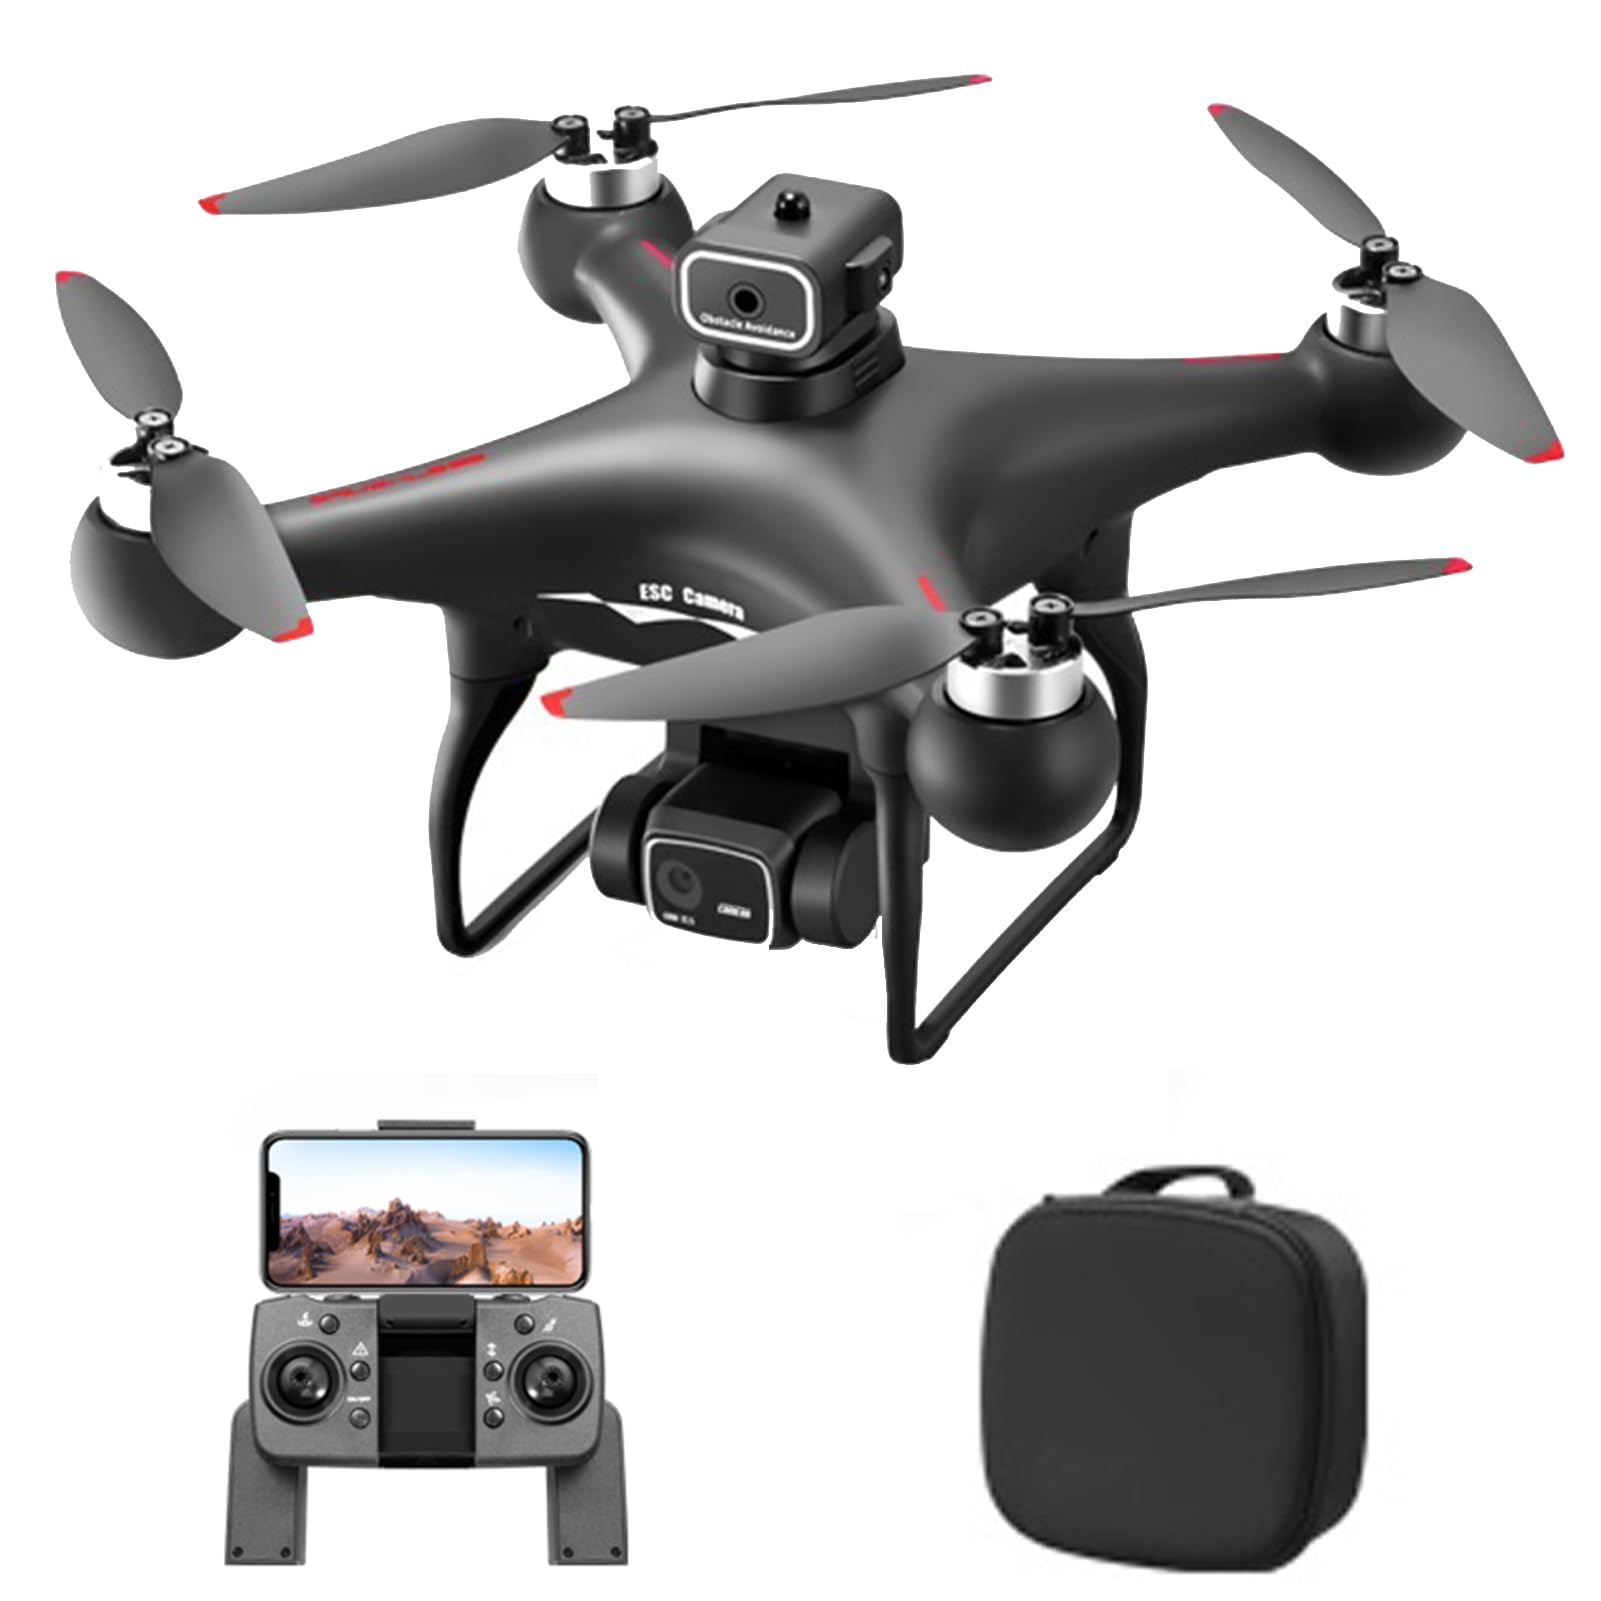 GoolRC S116 Drone with 4K Camera for Adults, RC Quadcopter with Obstacle Avoidance, Optical Flow, Trajectory Flight, Headless Mode, Gravity Sensor, Brushless Motor, Storage Bag and 2 Batteries (Black)